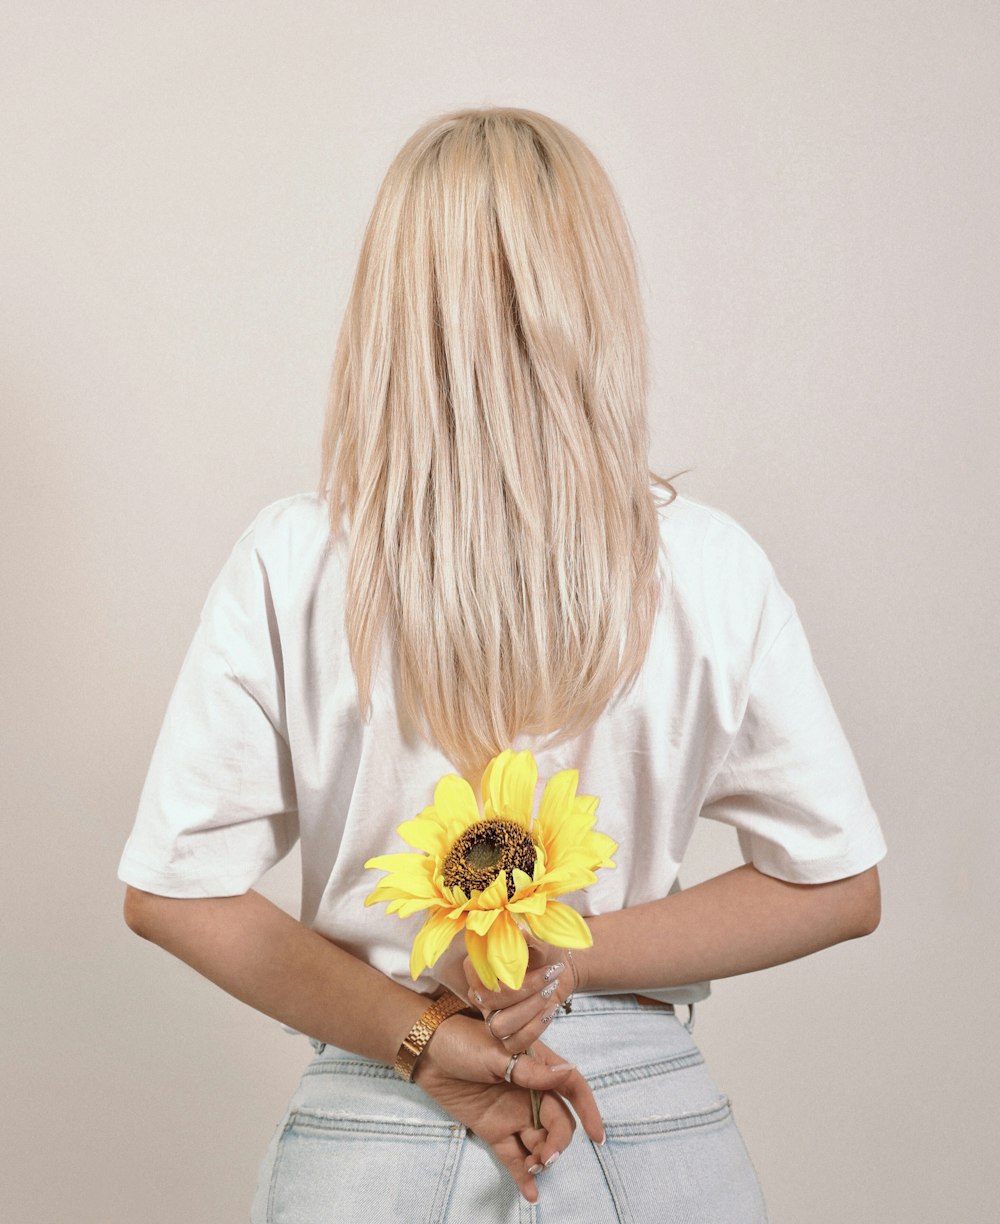 a woman with blonde hair holding a sunflower